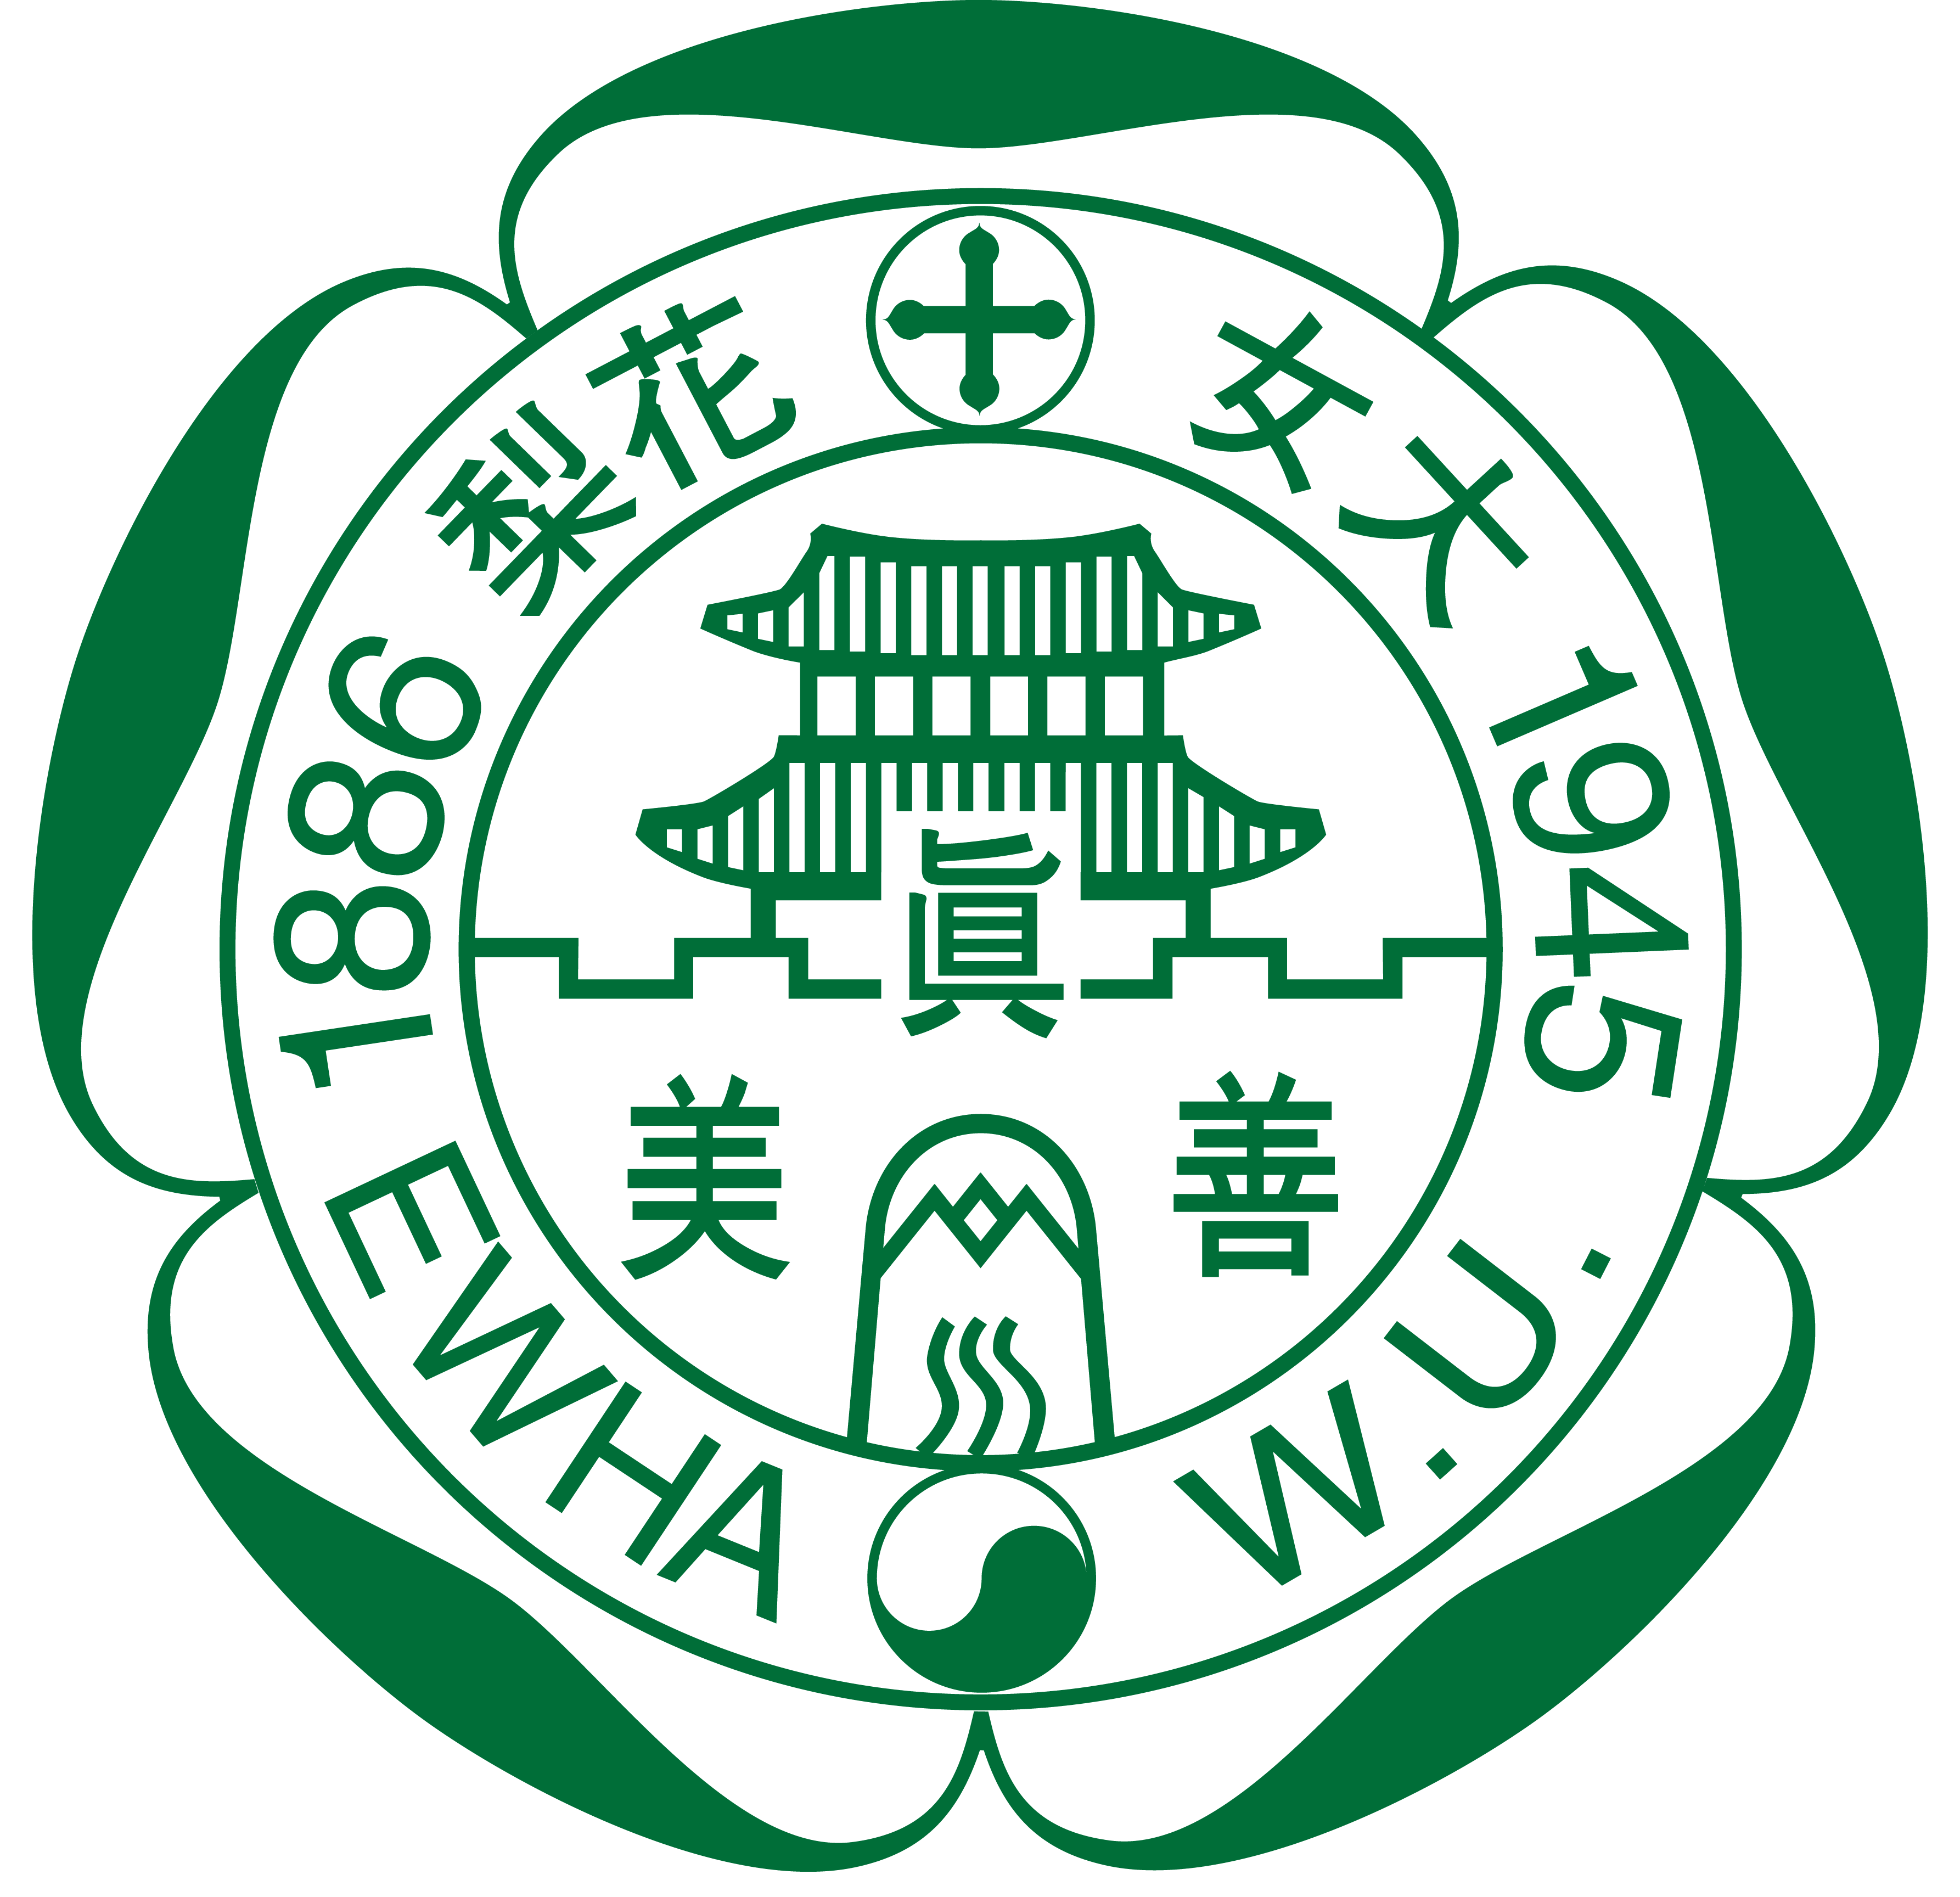 Ewha Womans University Foreign Student Admission Unit Eligibility Schedule_English Version 이화여대 외국인전형 모집단위 지원자격 전형일정_영어본_00.png